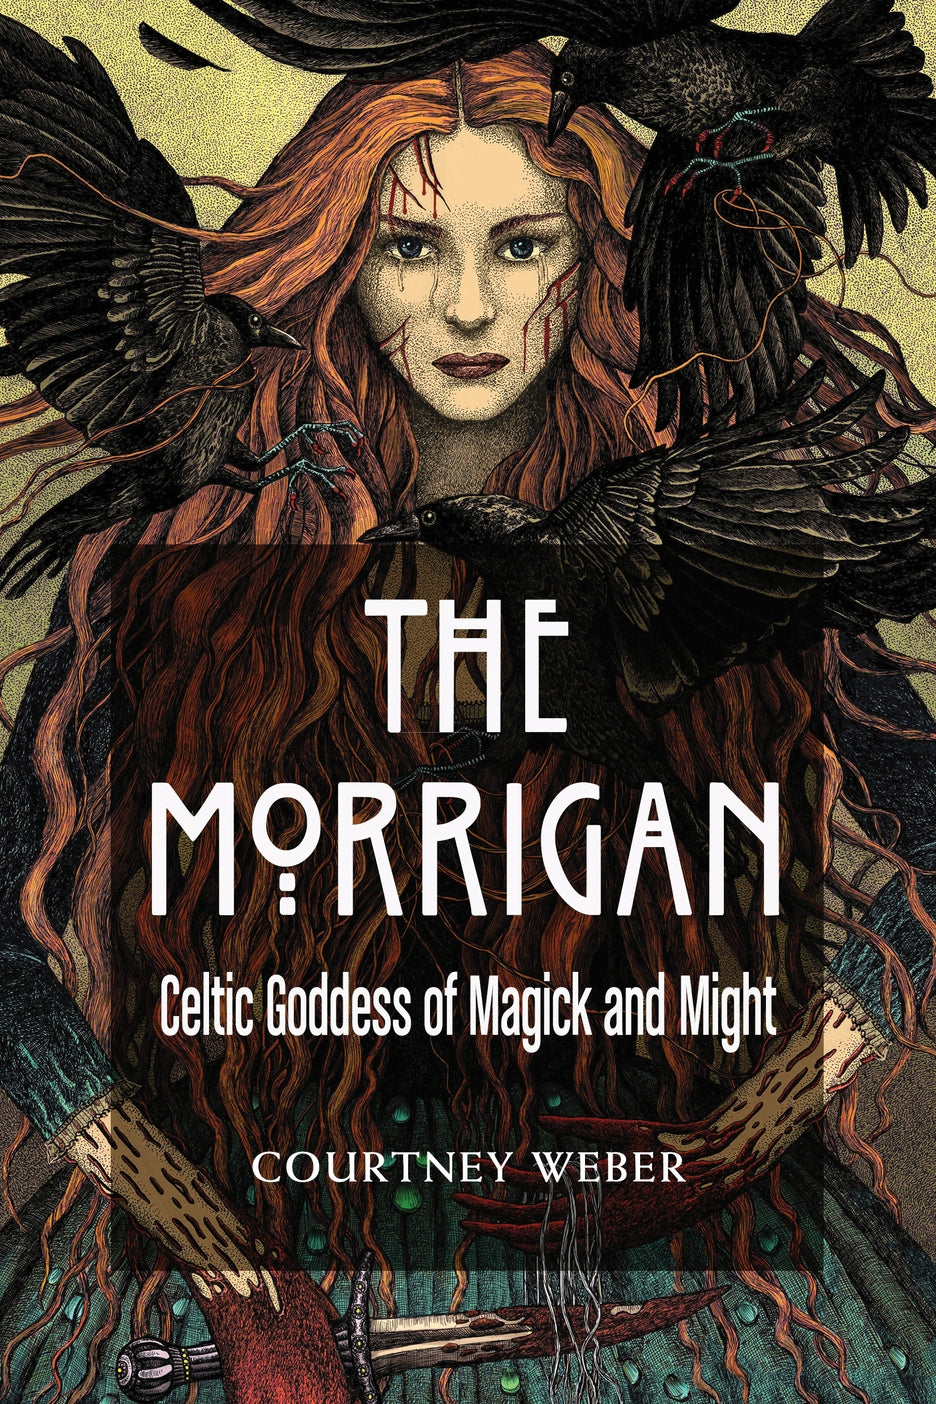 The Morrigan - Celtic Goddess of Magick And Might